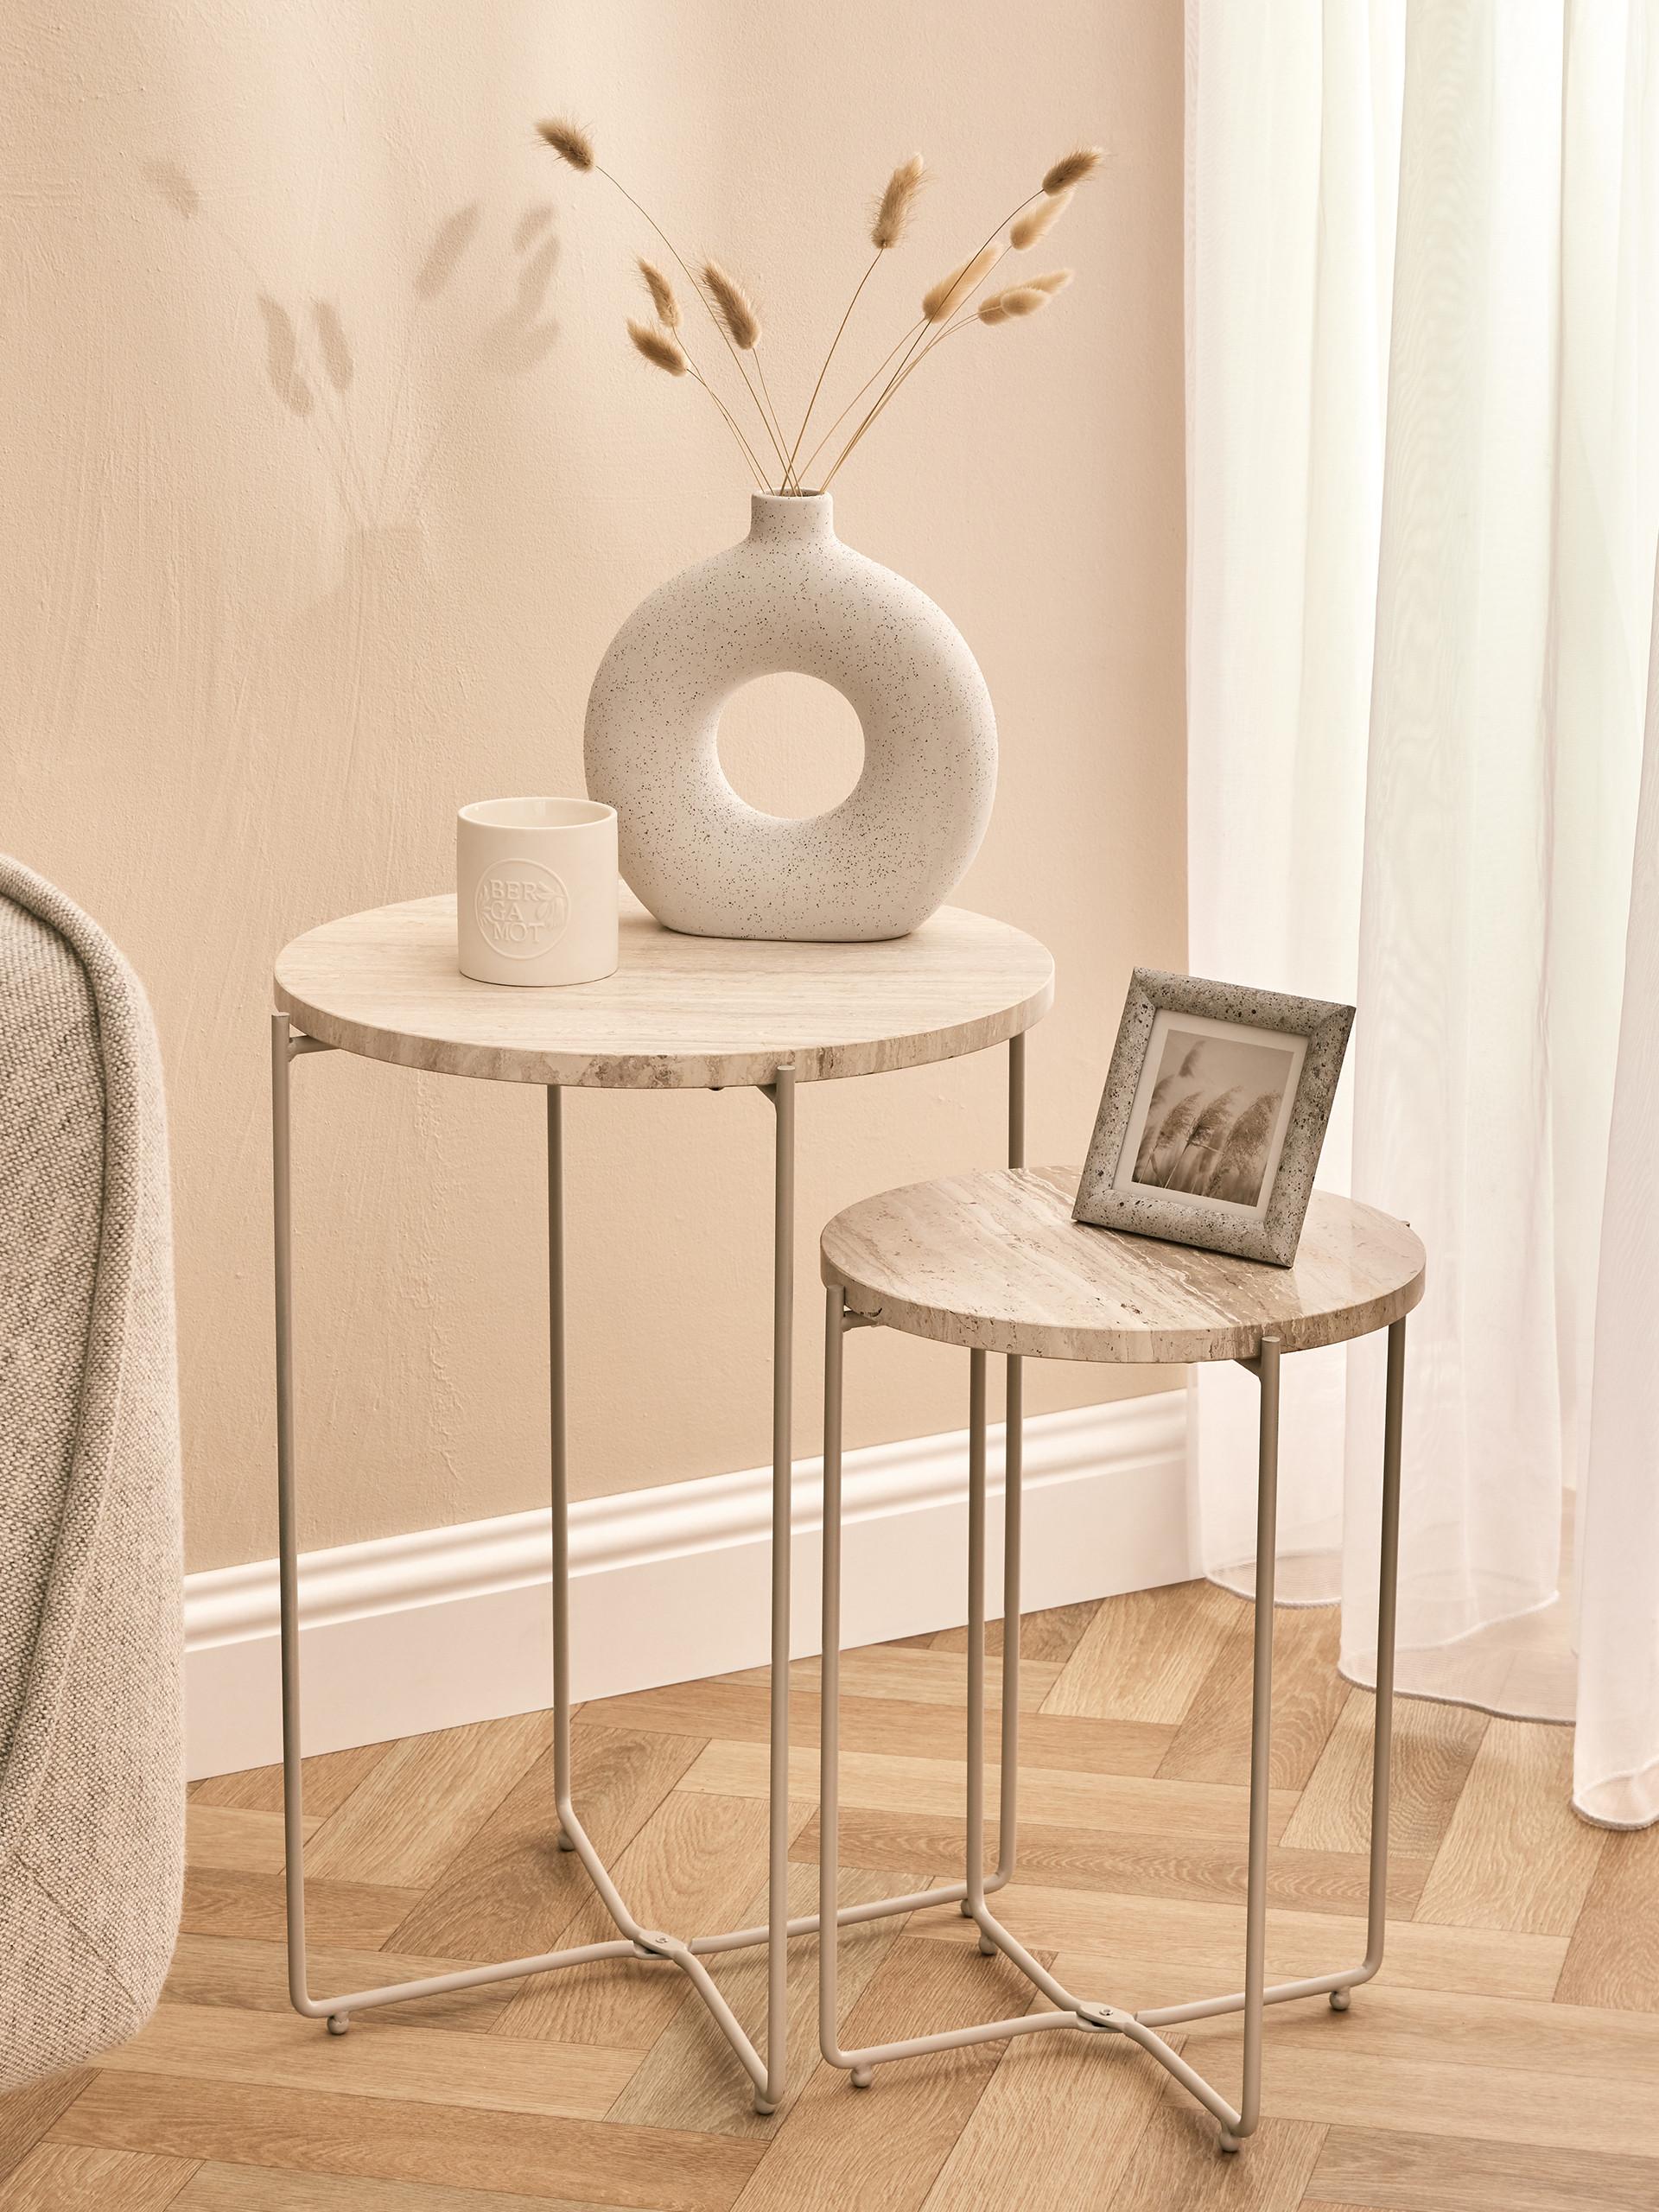 Coffee tables with vase, candle and photo frame